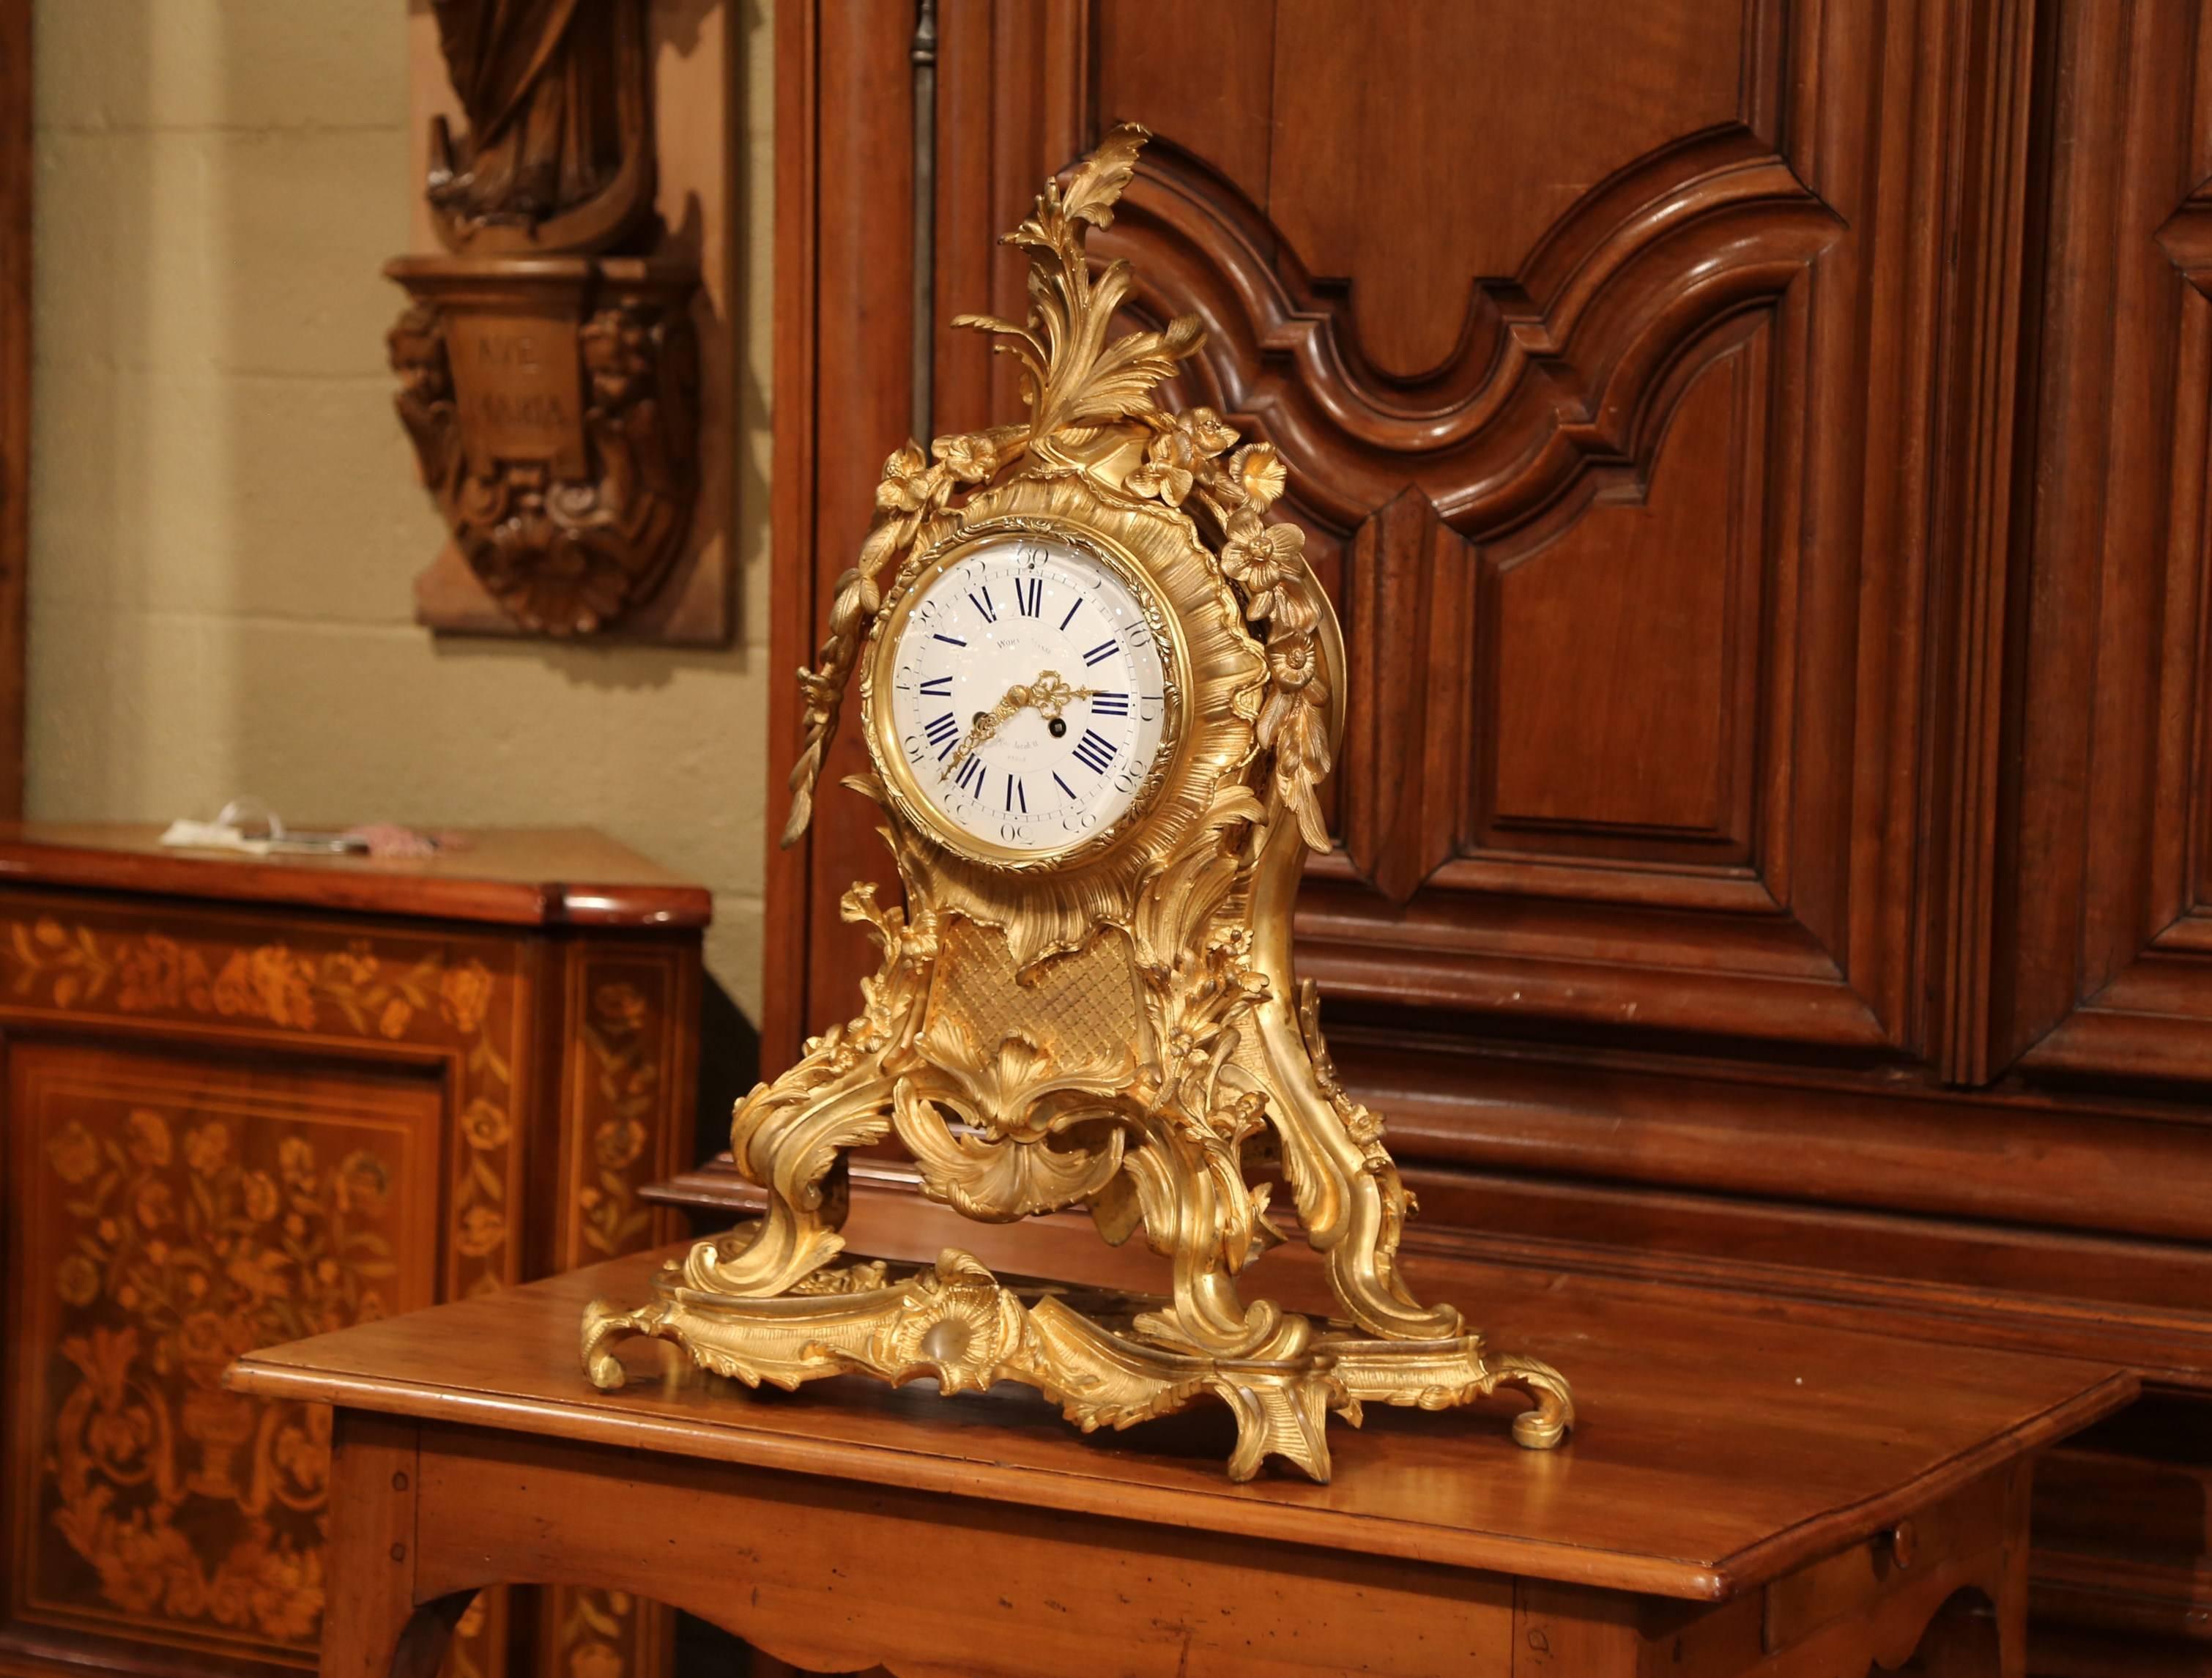 This large, tall, antique mantel clock was crafted in Paris, France, circa 1870. The stately, bronze time keeper stands on scrolled feet and is connected to a conforming base. The ornate, rococo clock features applied foliate and scroll decorations